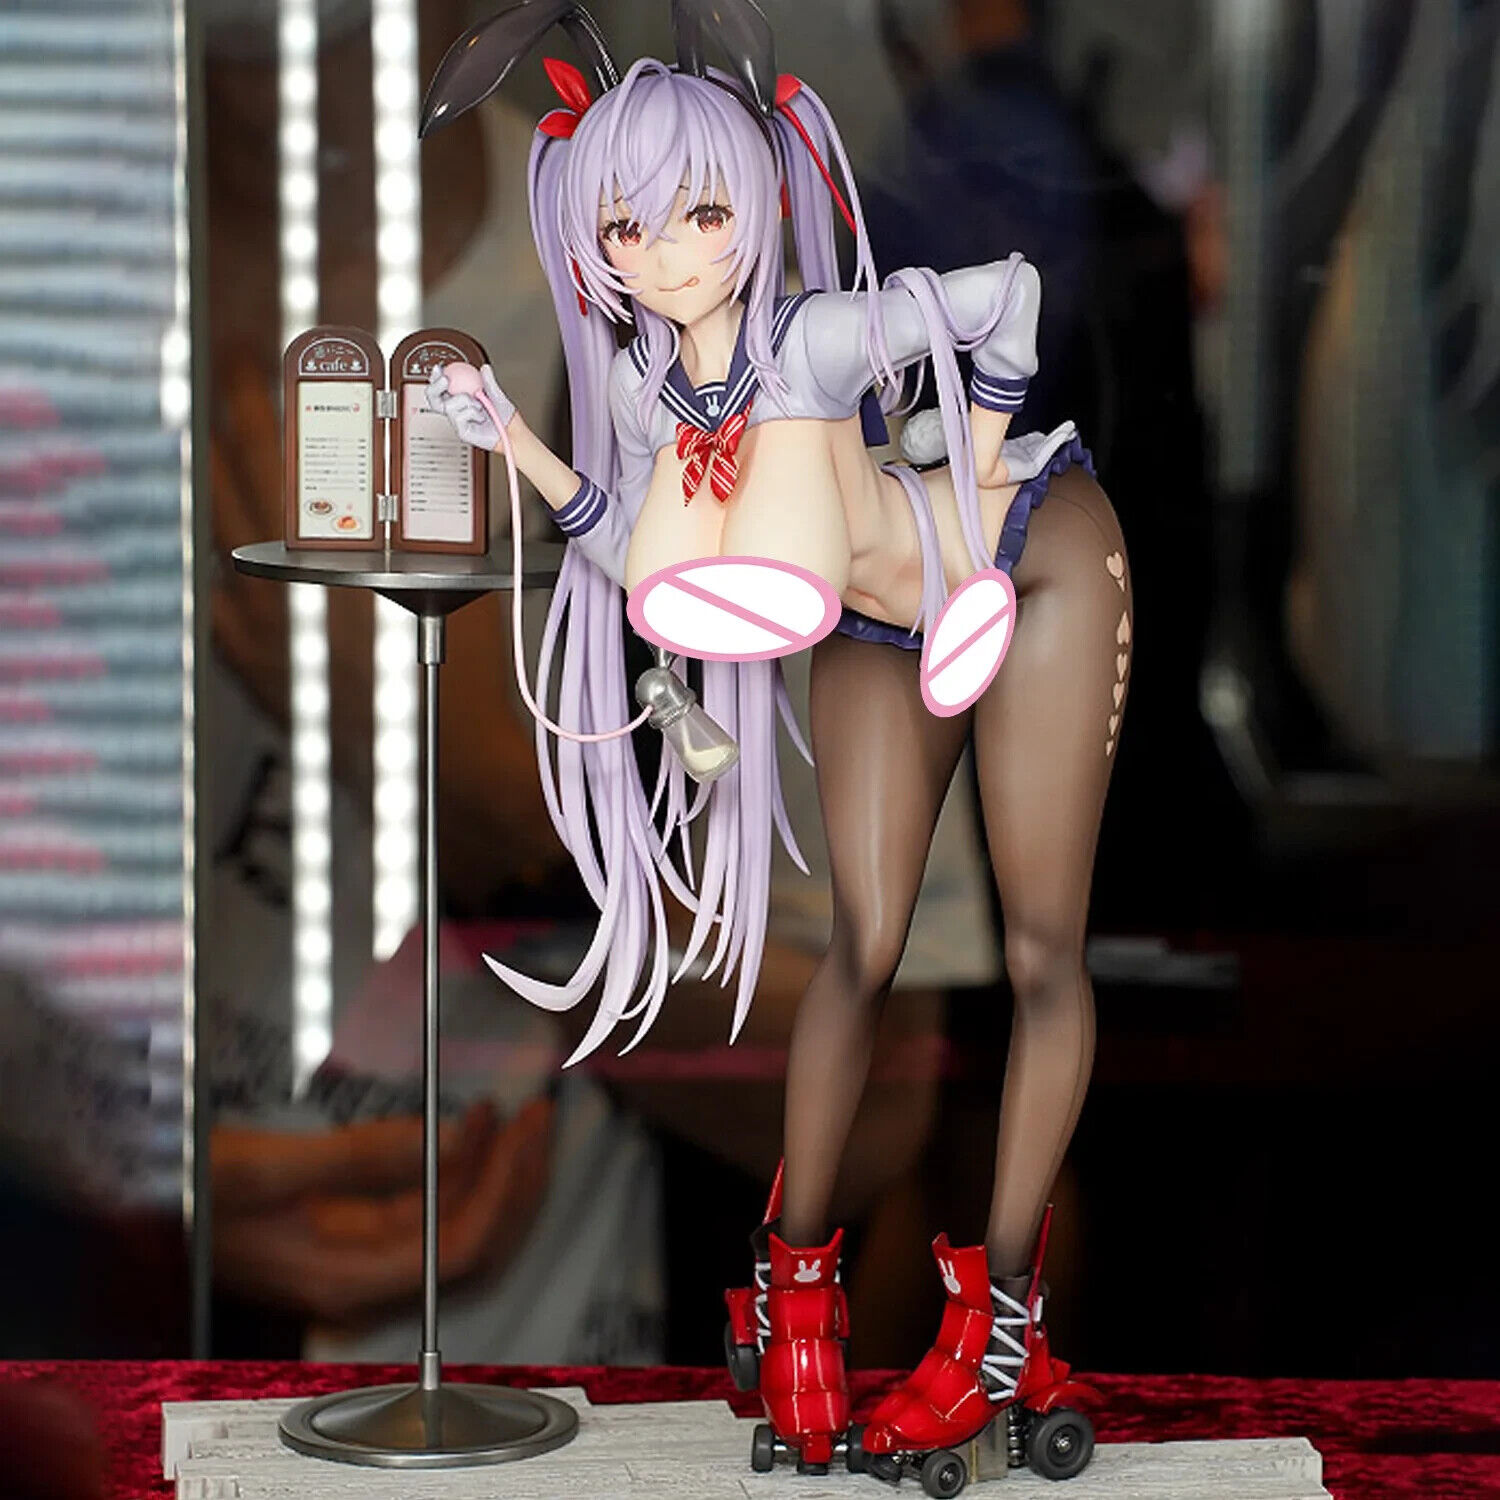 Anime Native Rocket Boy Twintail-chan Bunny Girl 1/6 Scale Sexy Adult Figure 18+